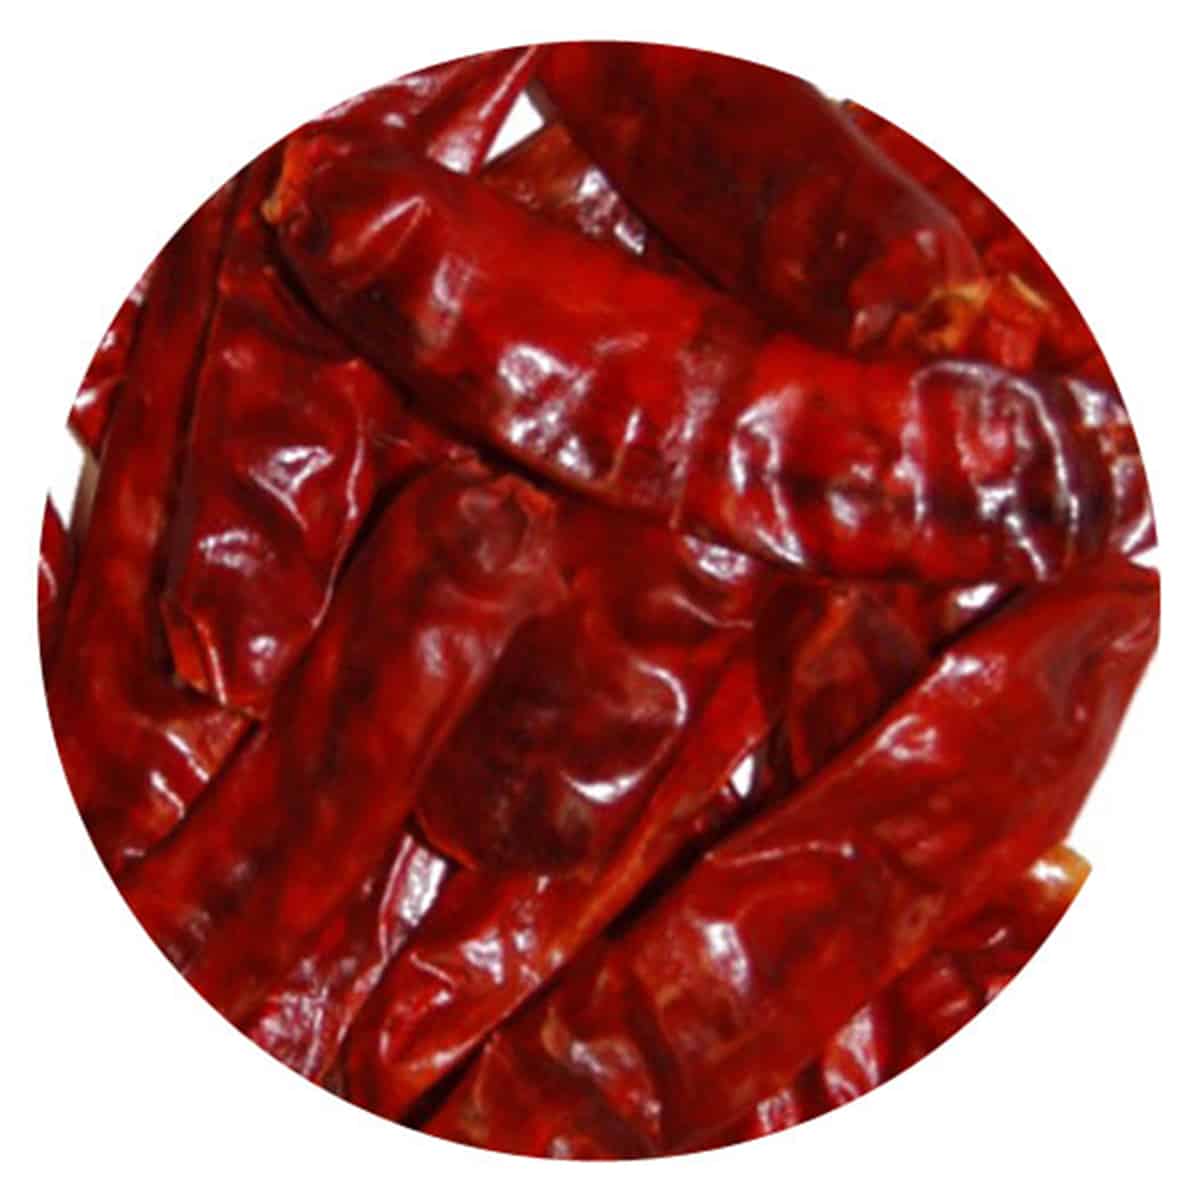 Buy IAG Foods Red Pepper (Red Chilli) Dried Whole without Stem - 1 kg